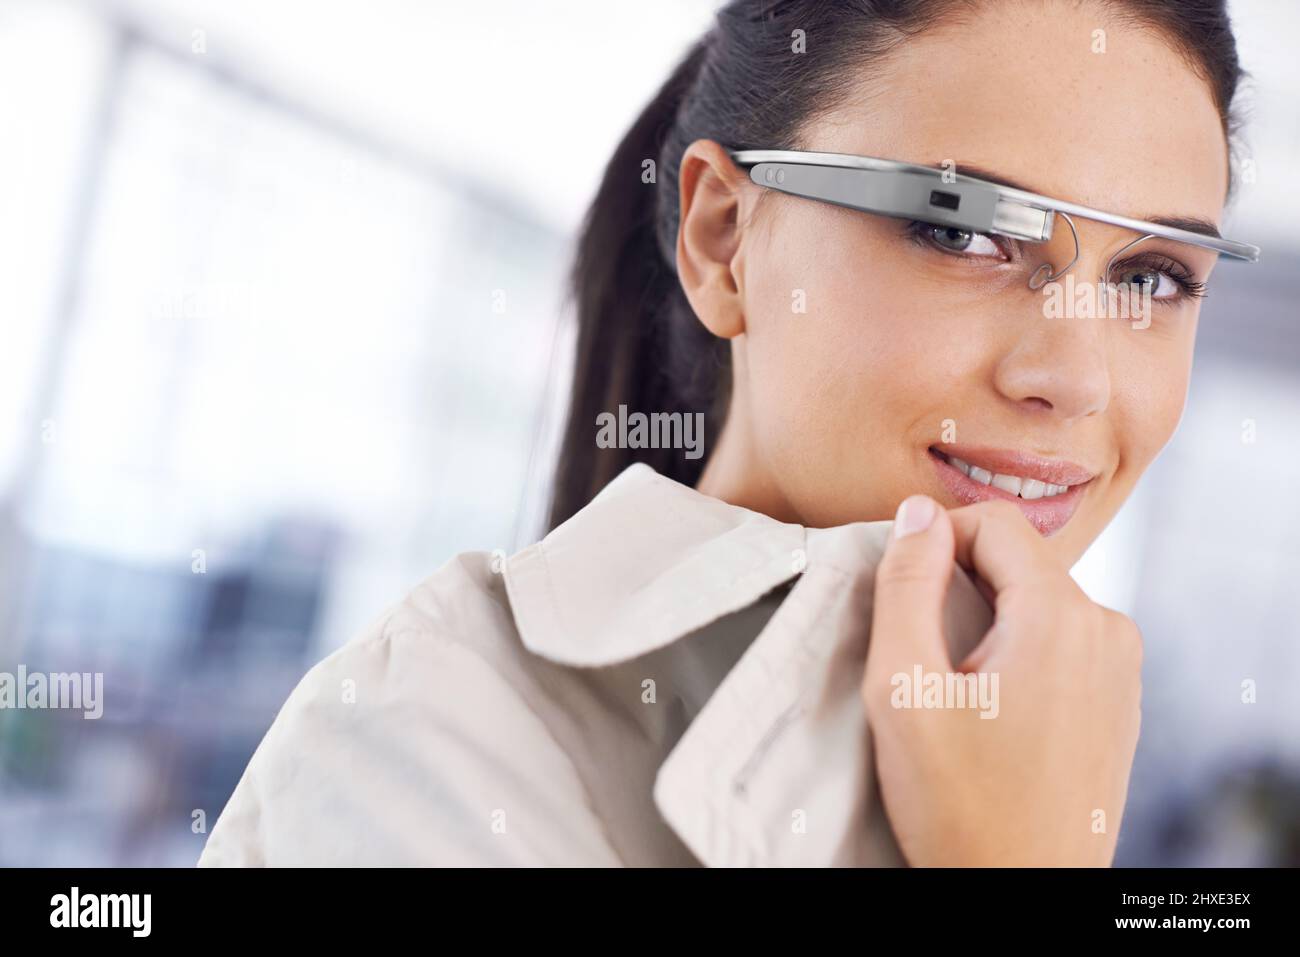 The future is now. Cropped portrait of an attractive young businesswoman using smartglasses in her office. Stock Photo